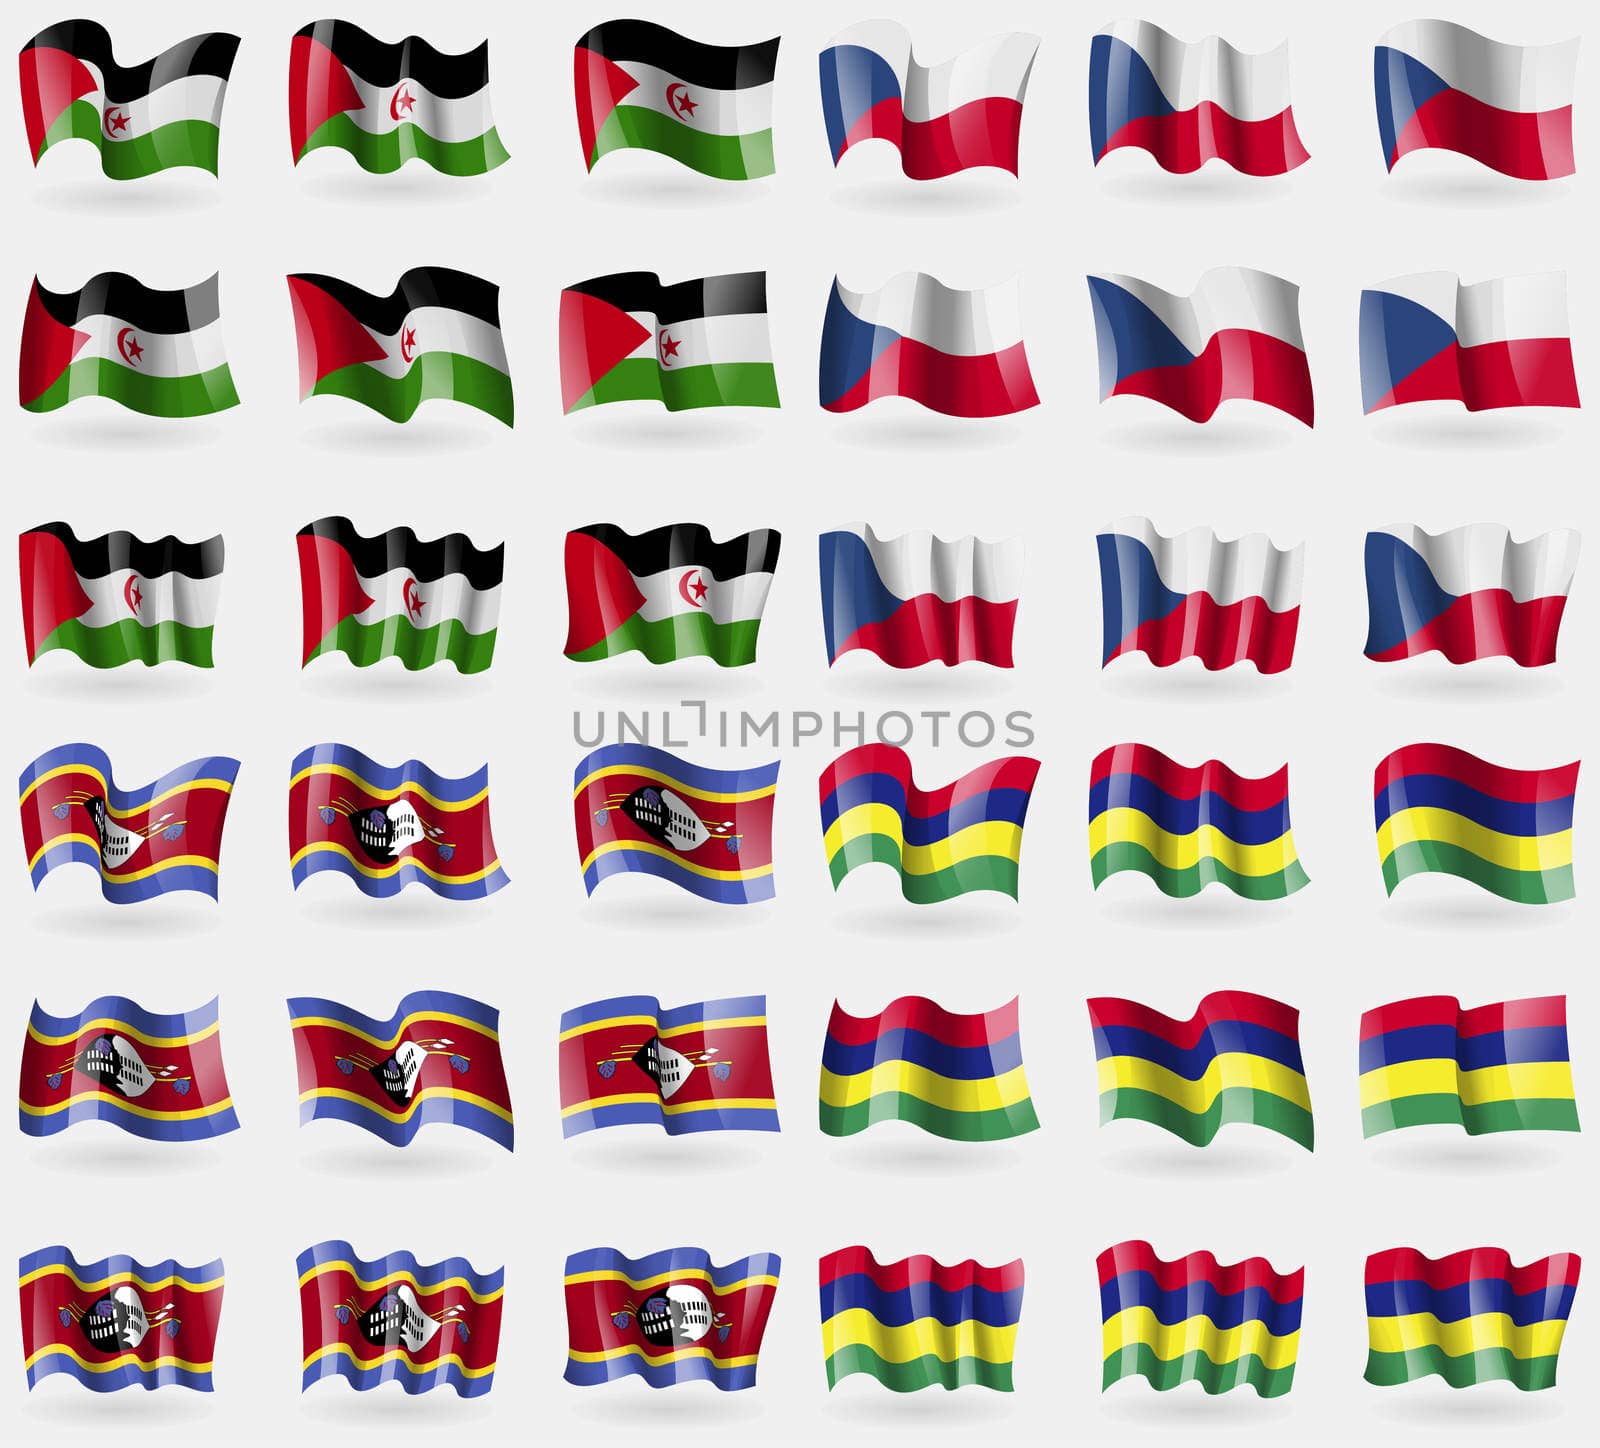 Western Sahara, Szech Republic, Swaziland, Mauritius. Set of 36 flags of the countries of the world. illustration